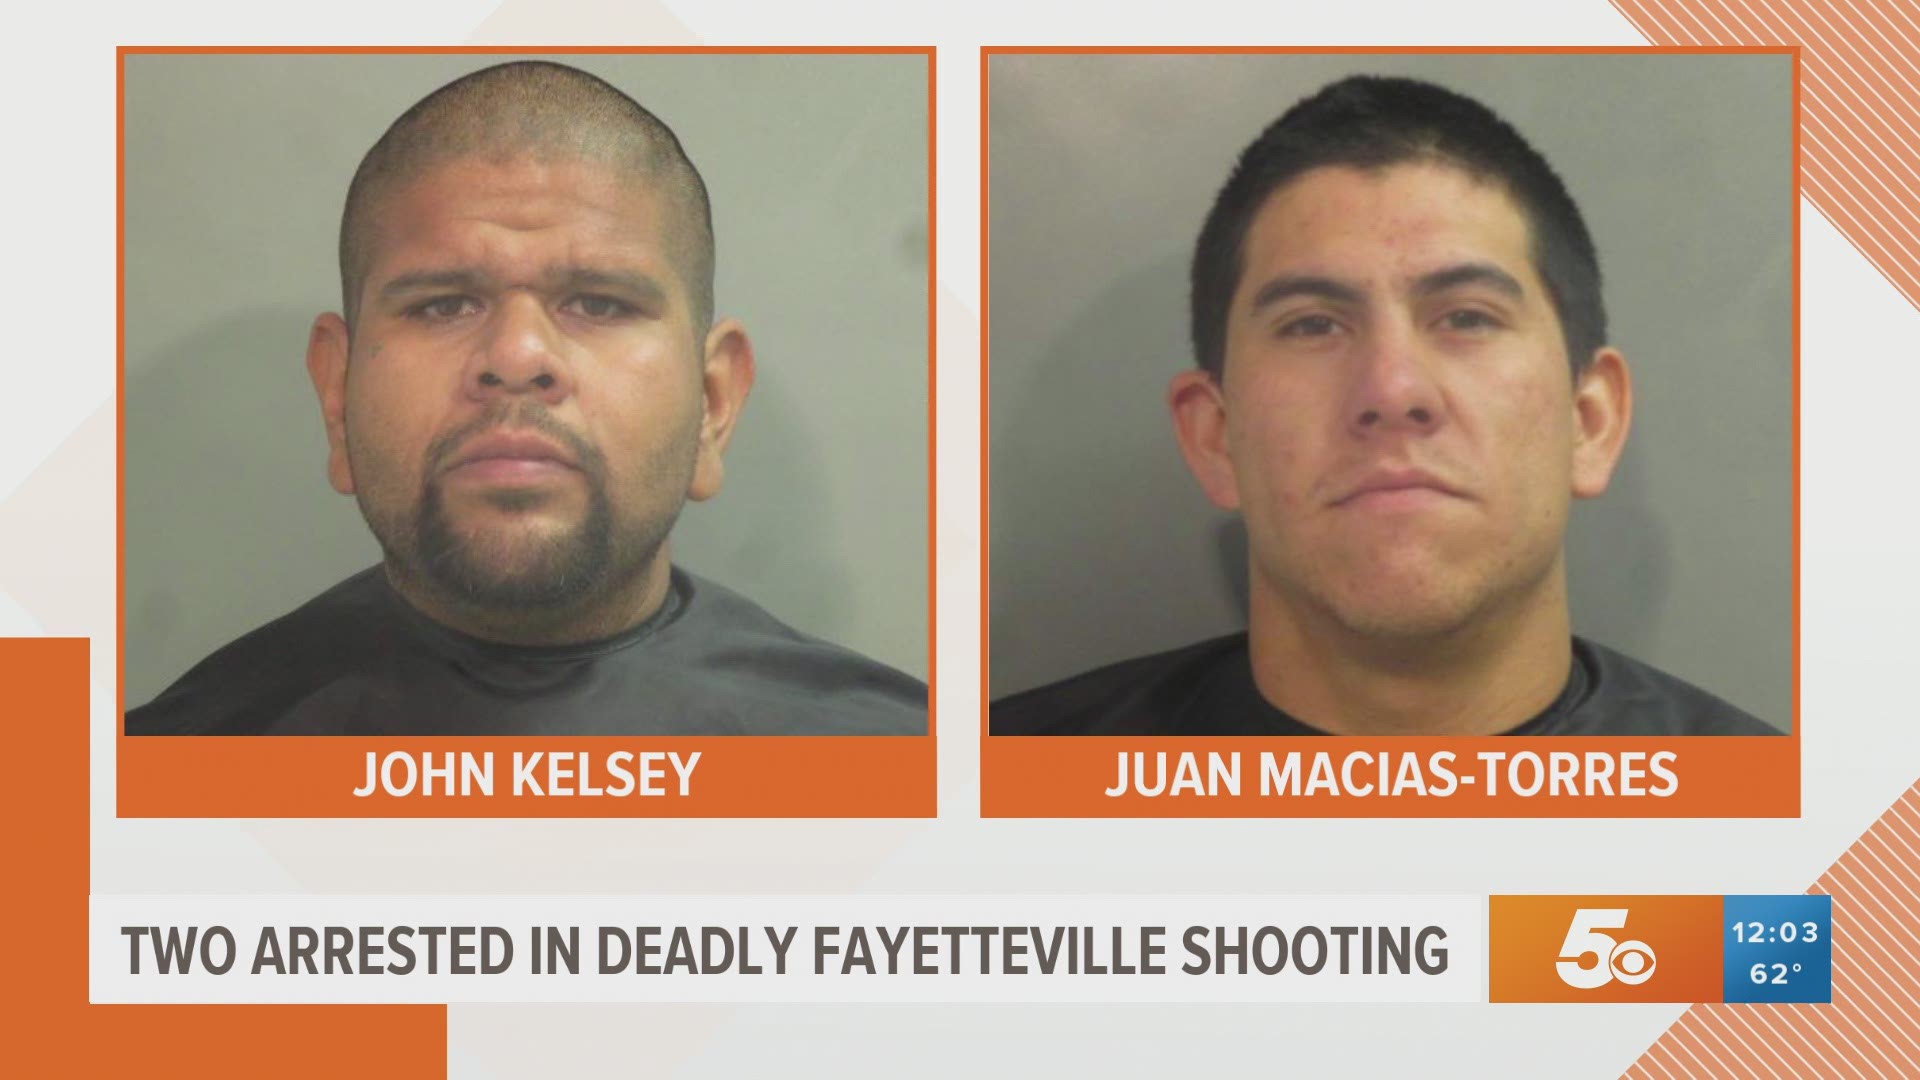 An investigation led to the arrests of 33-year-old John Kelsey and 25-year-old Juan Macias-Torres.